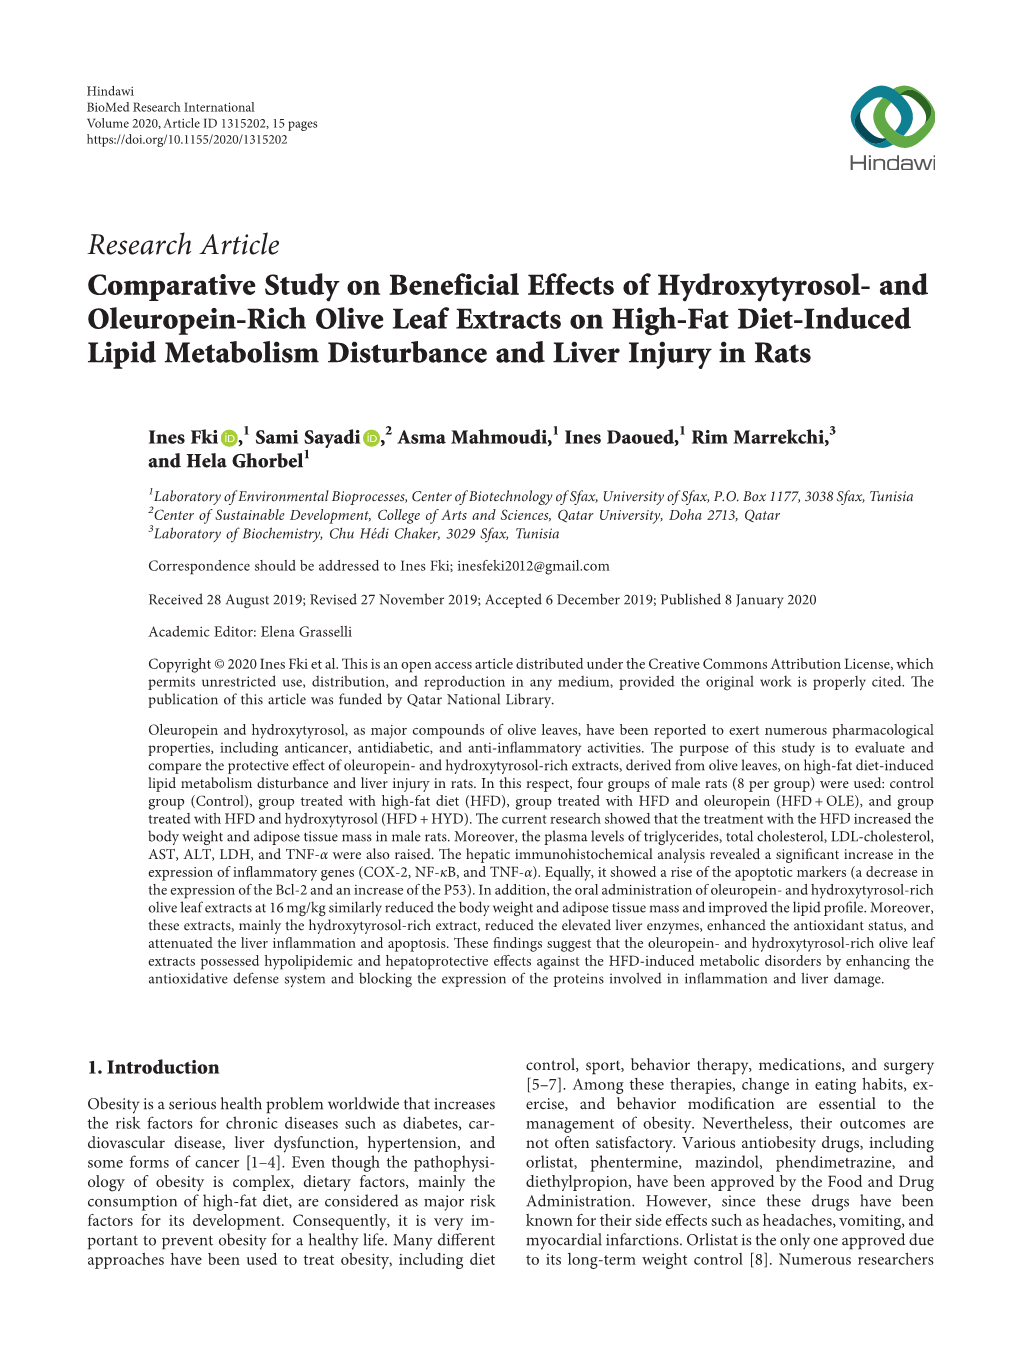 Comparative Study on Beneficial Effects of Hydroxytyrosol-And